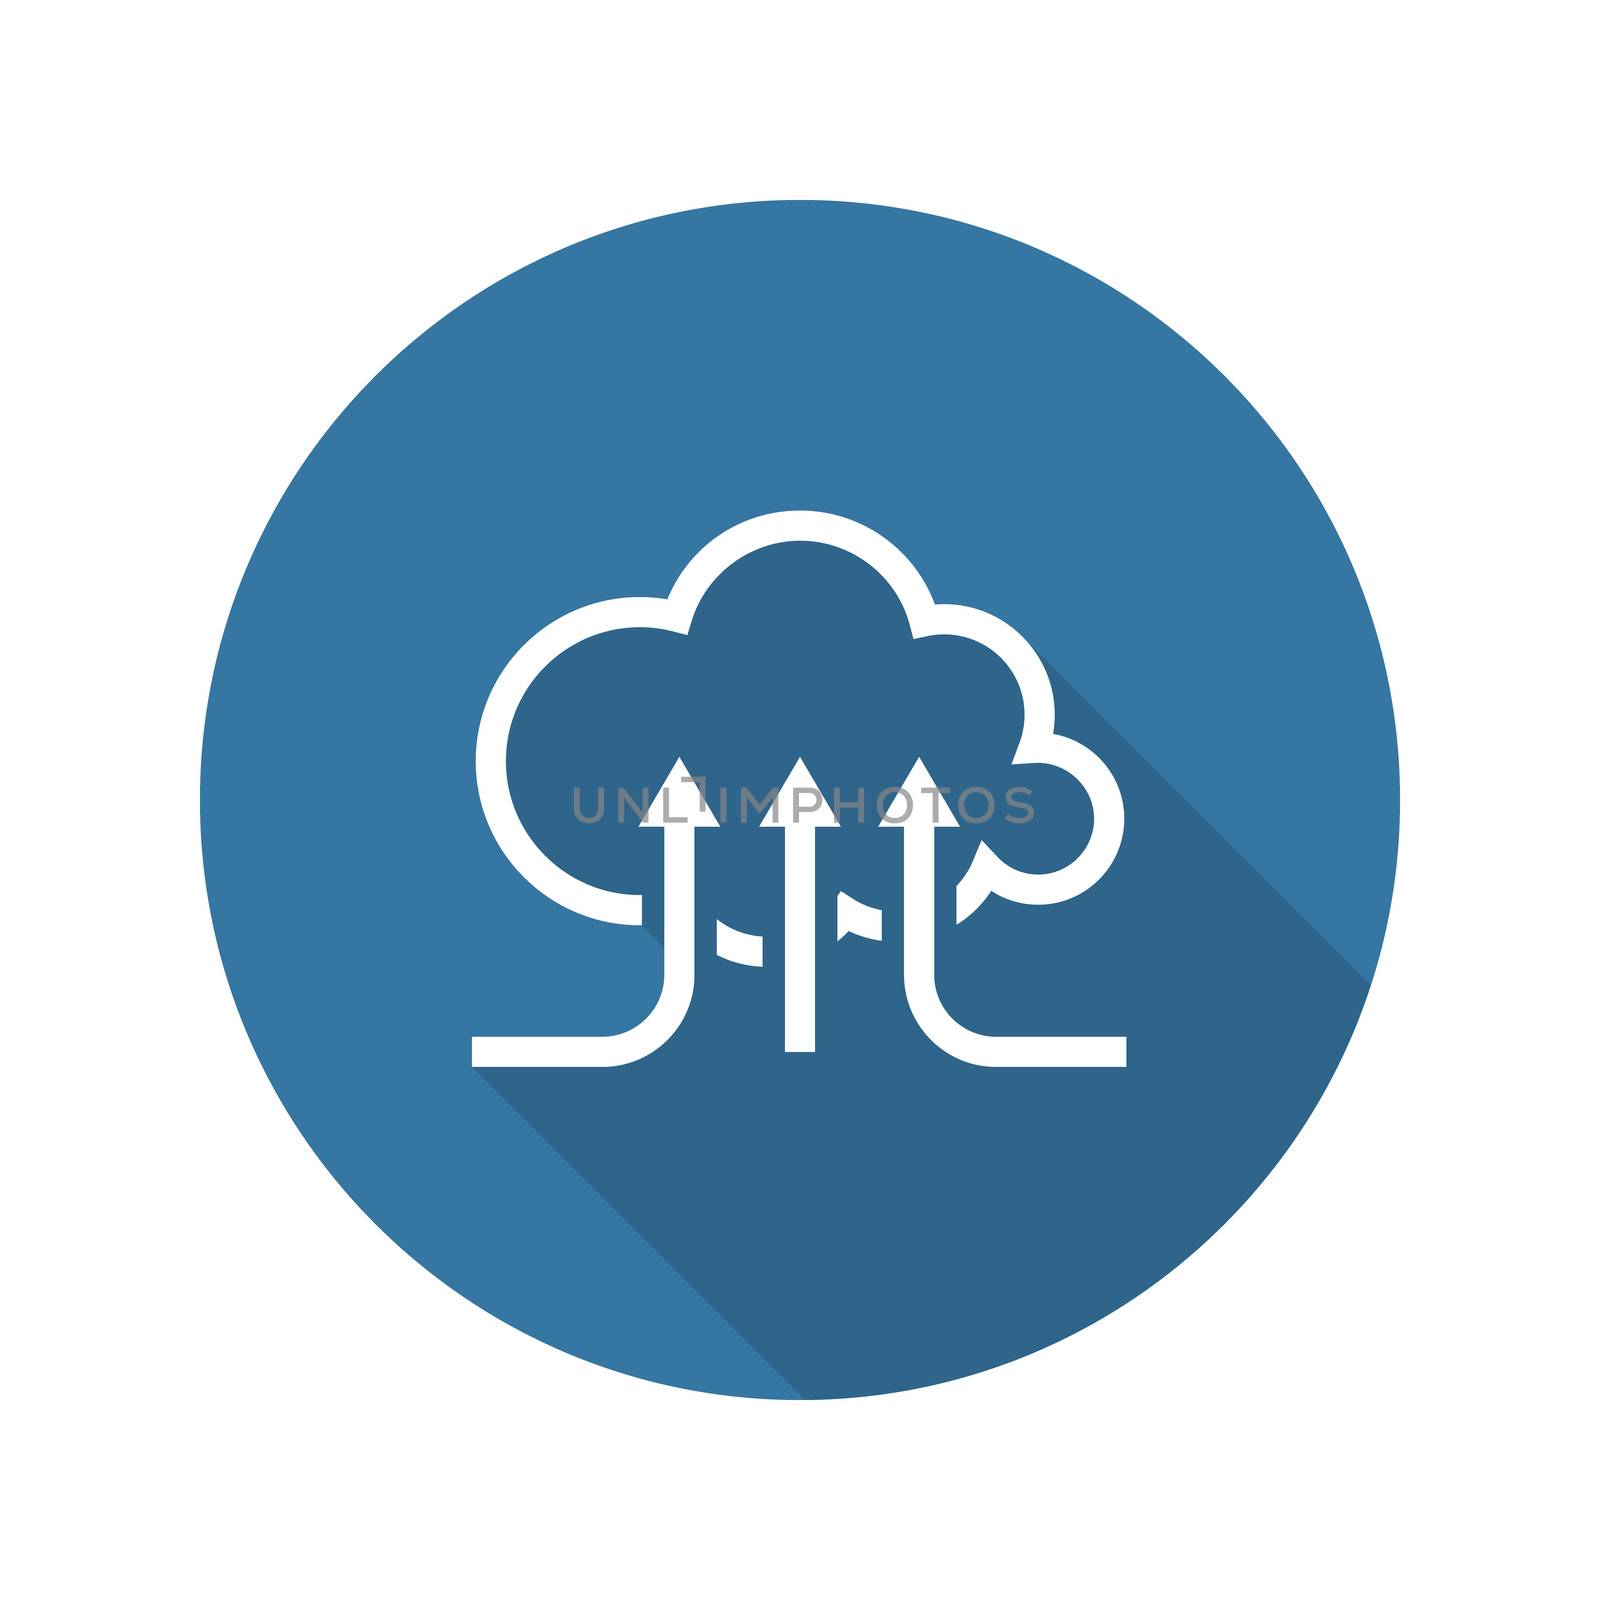 Online Cloud Services. Flat Design Icon. Long Shadow. Isolated Illustration.